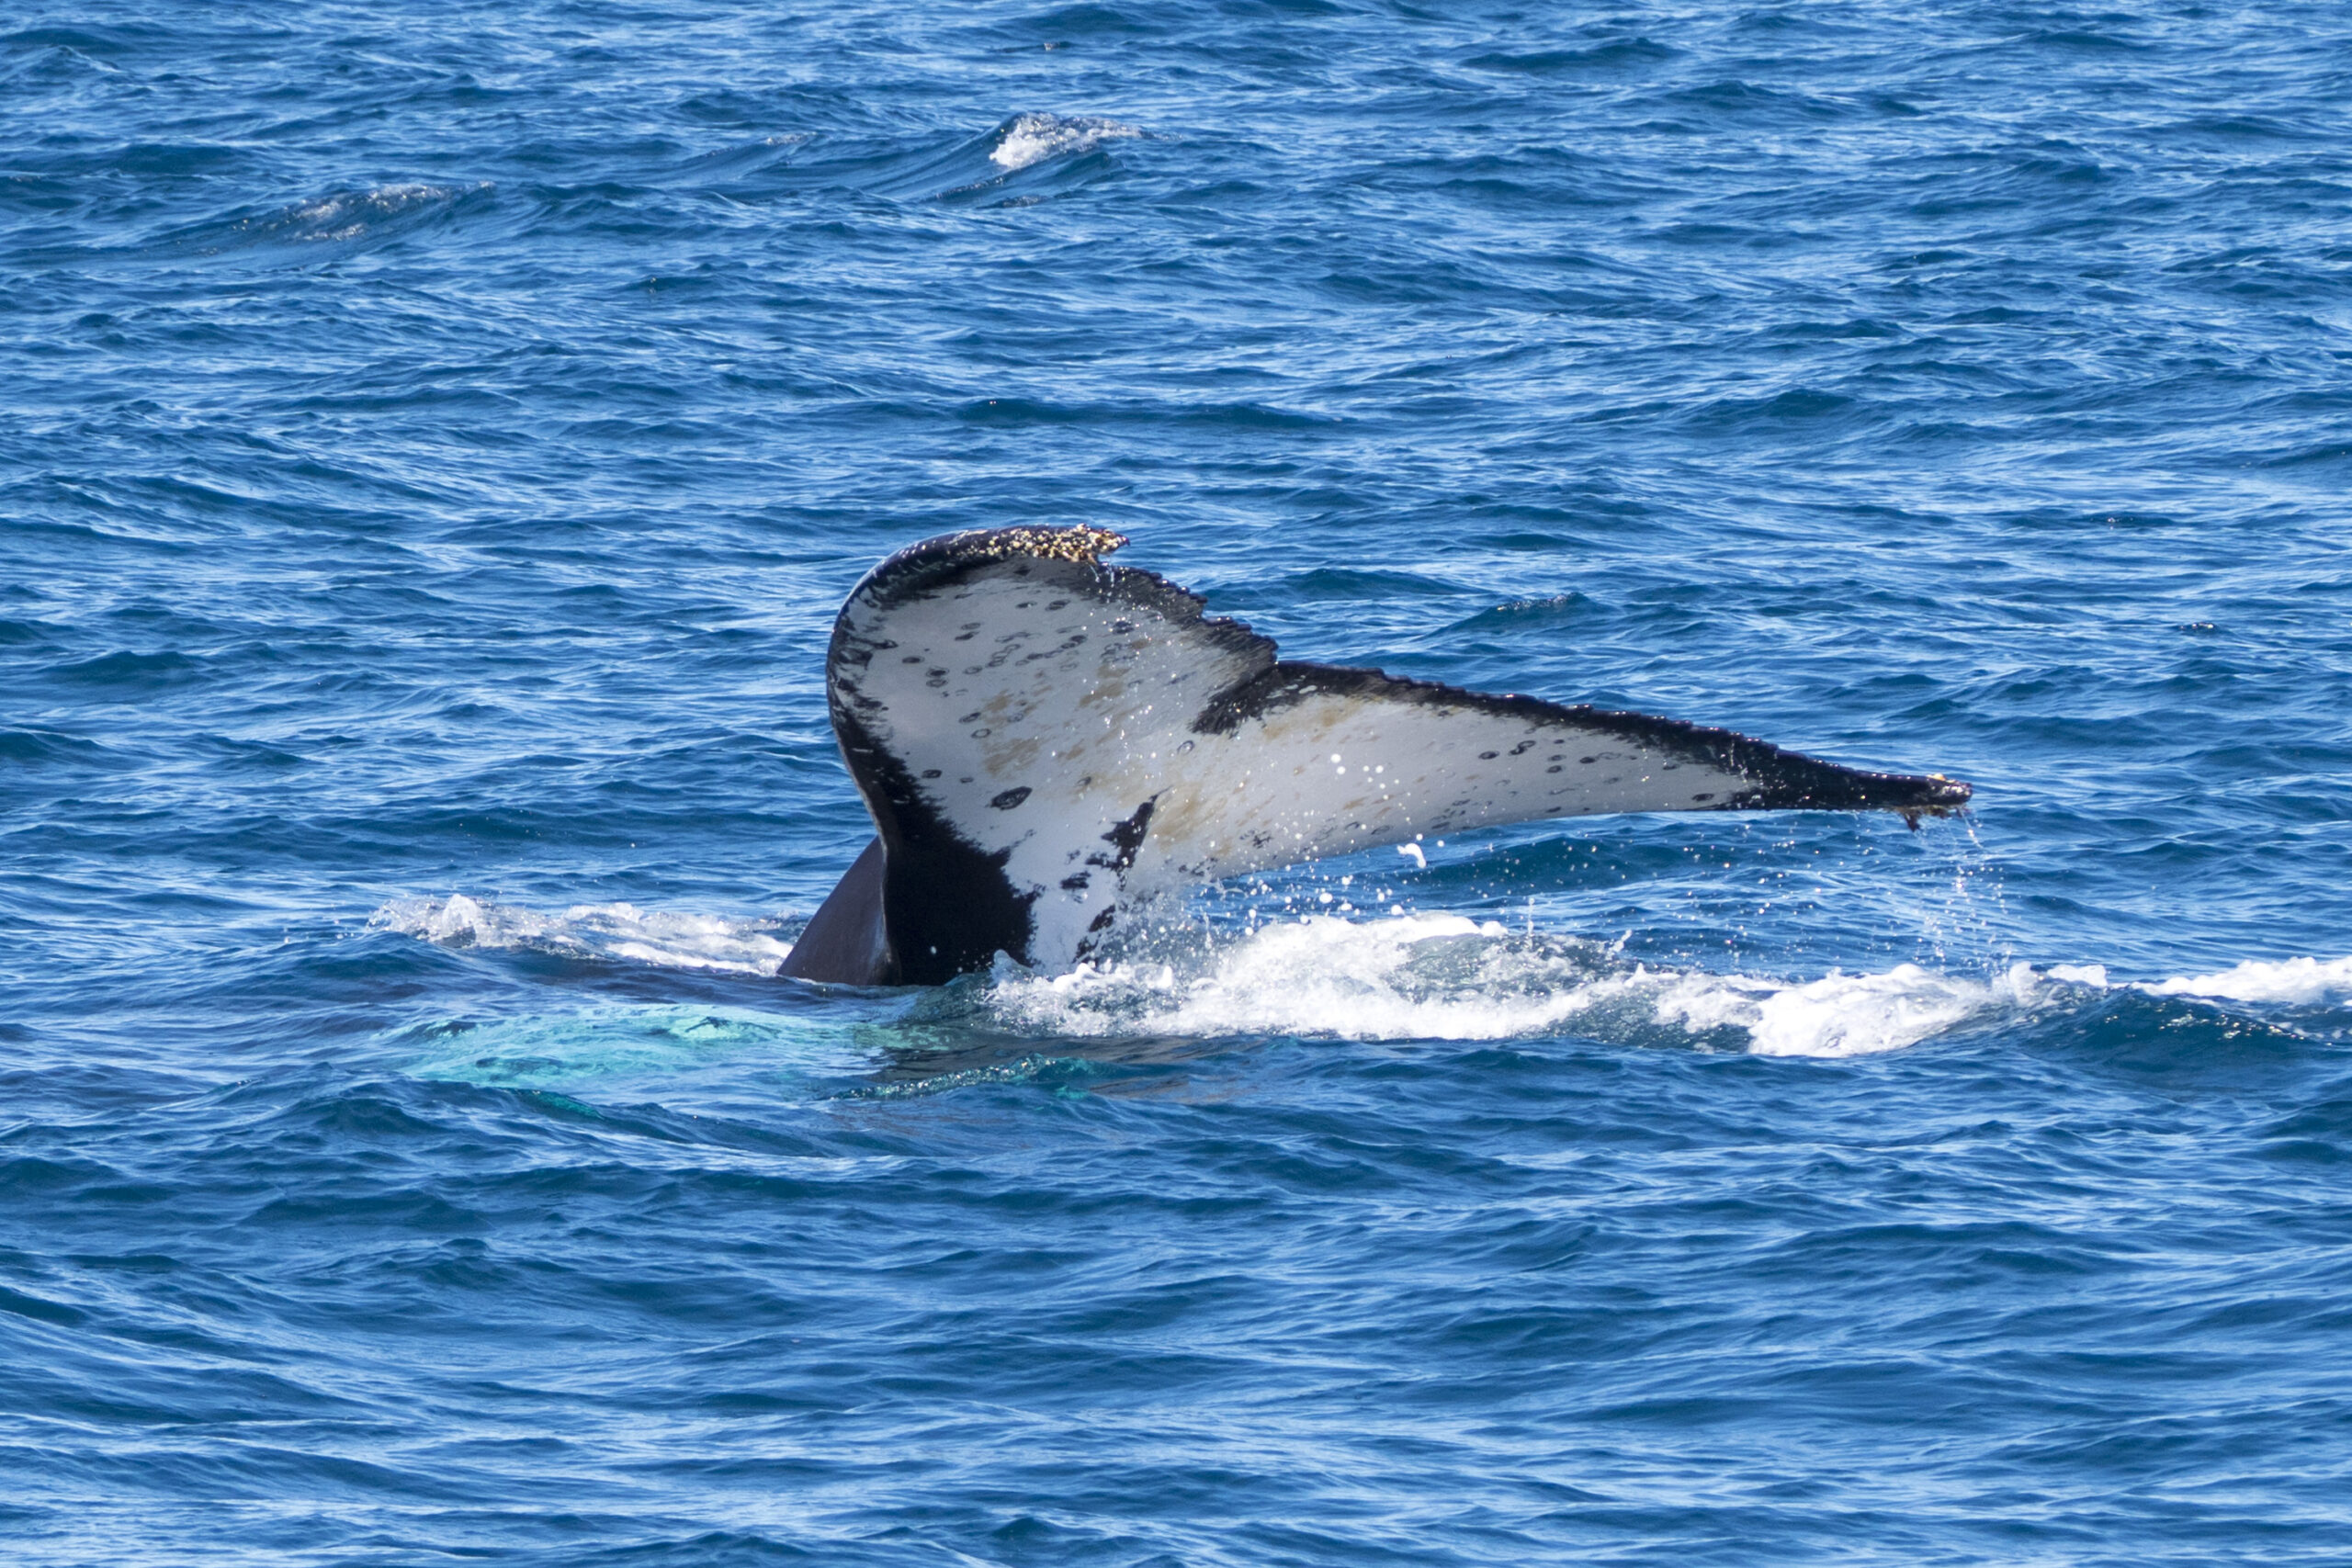 Whale Watching Tour